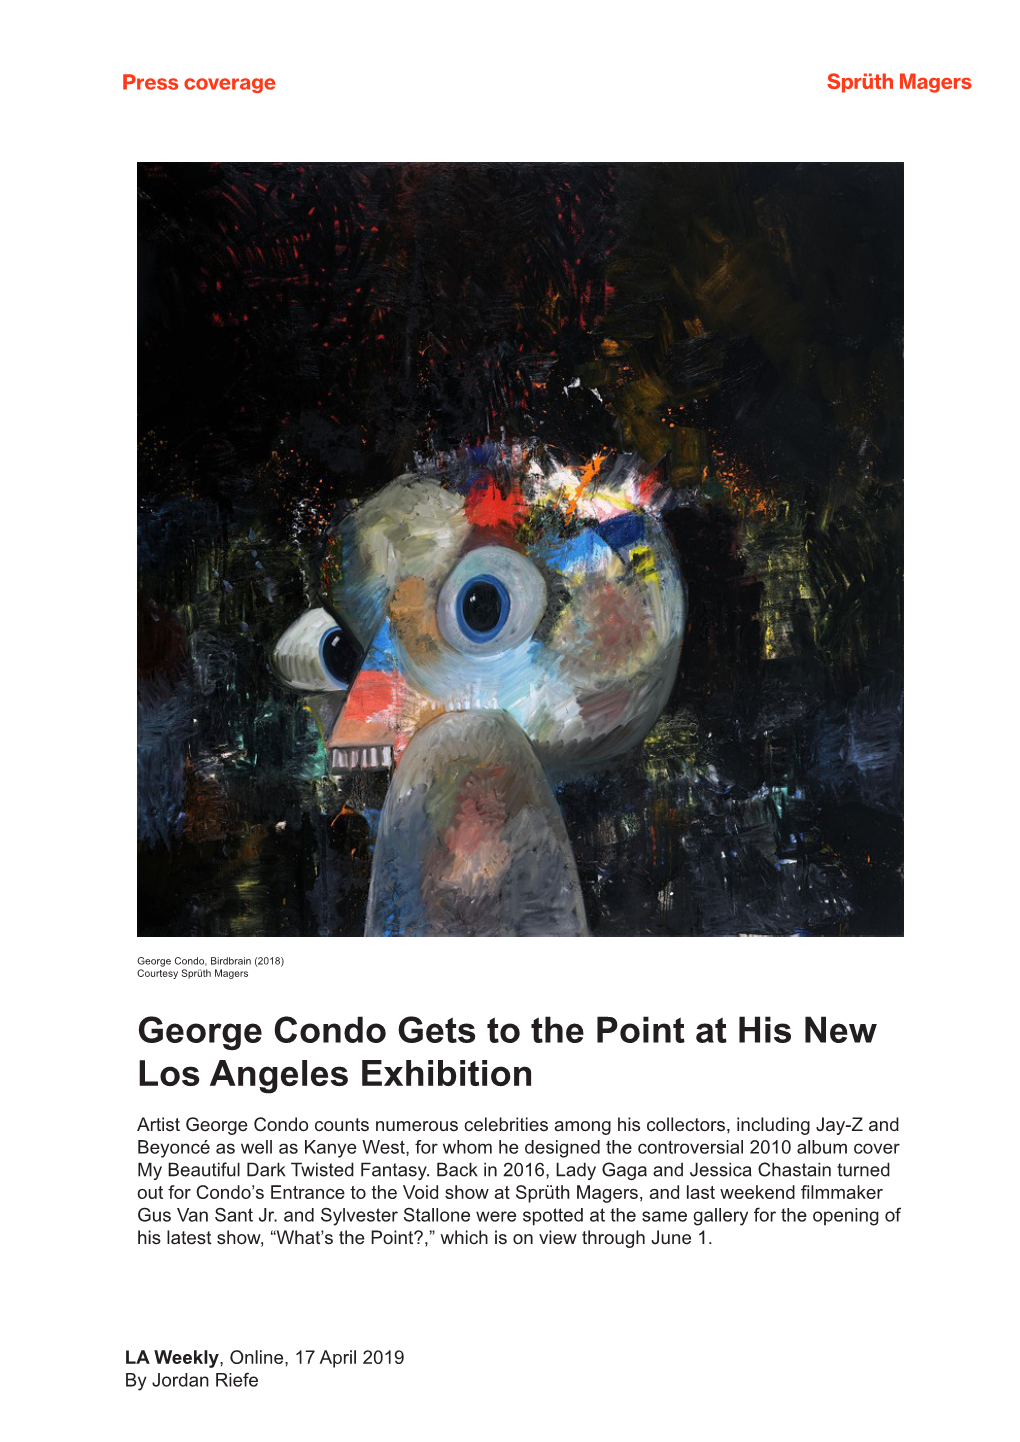 George Condo Gets to the Point at His New Los Angeles Exhibition